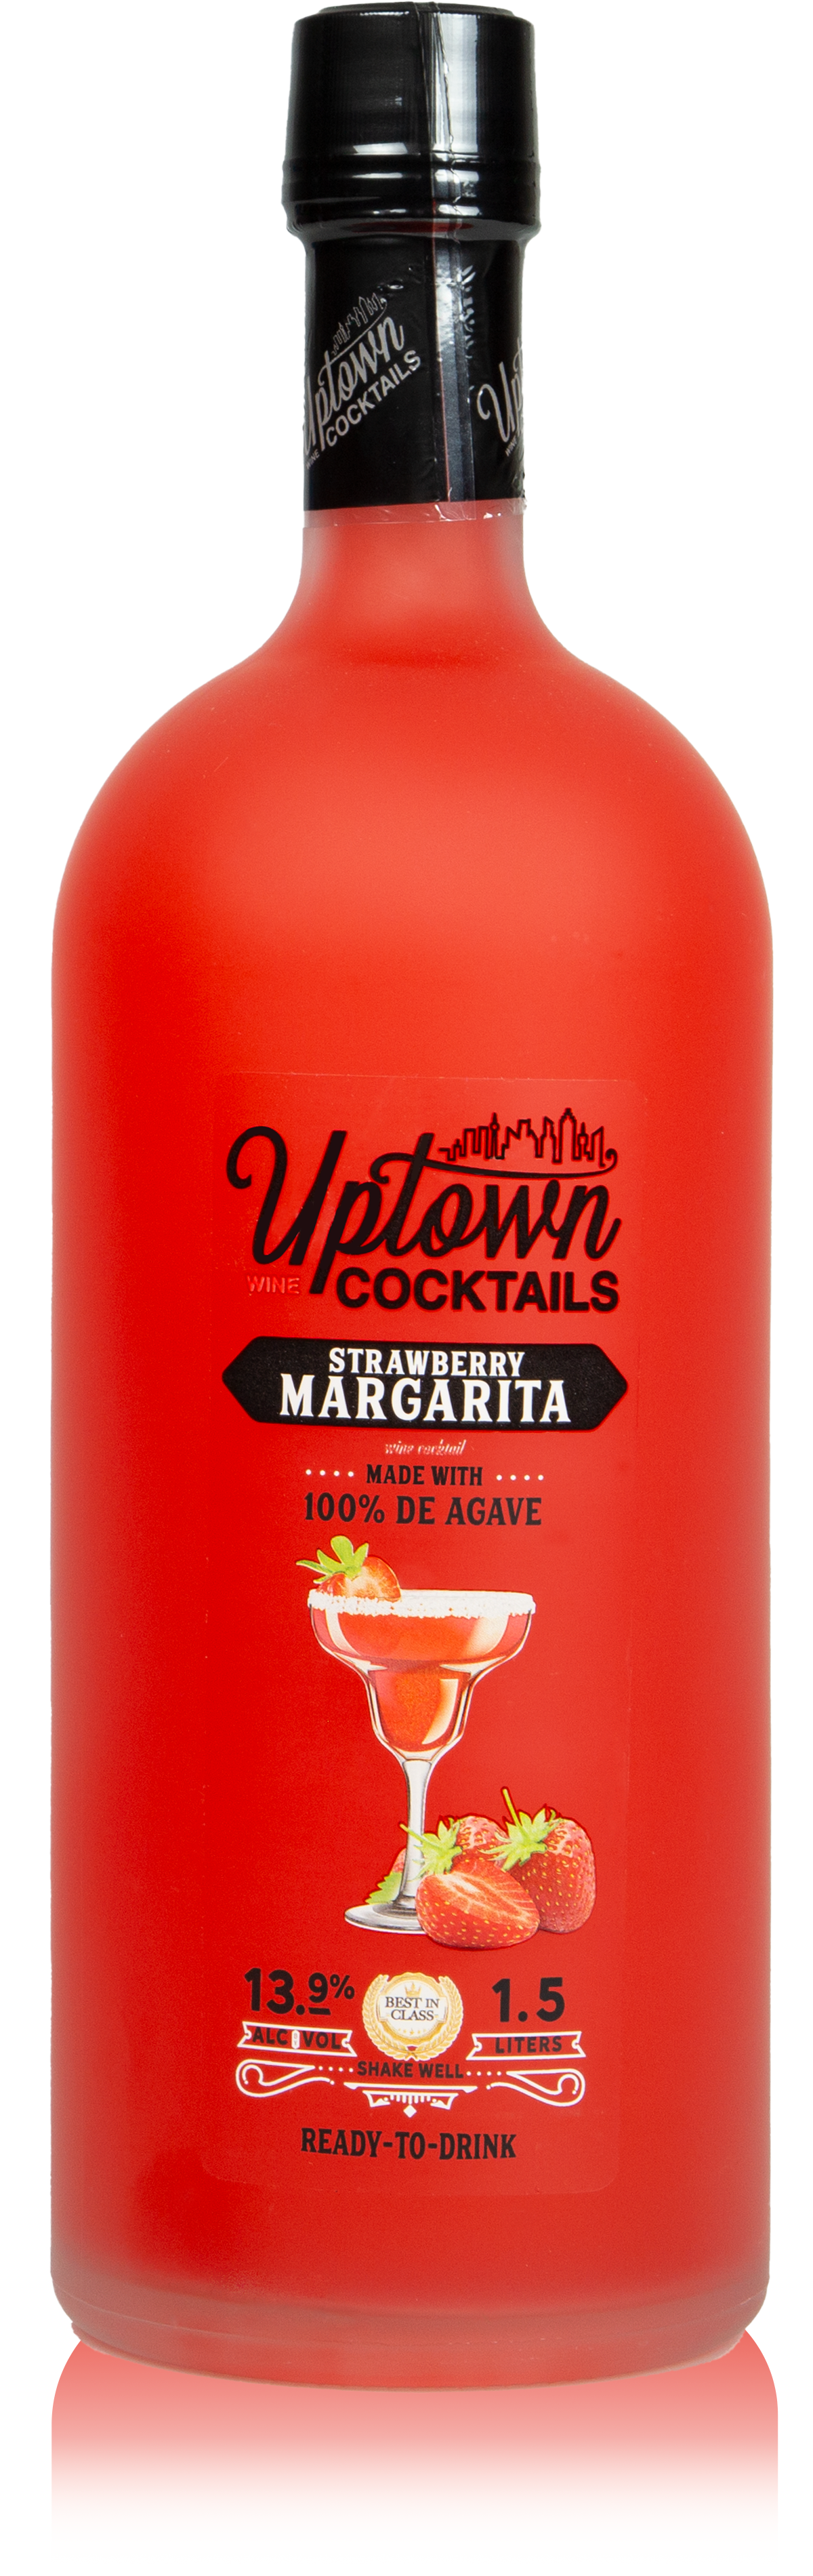 Product Image for Strawberry Margarita